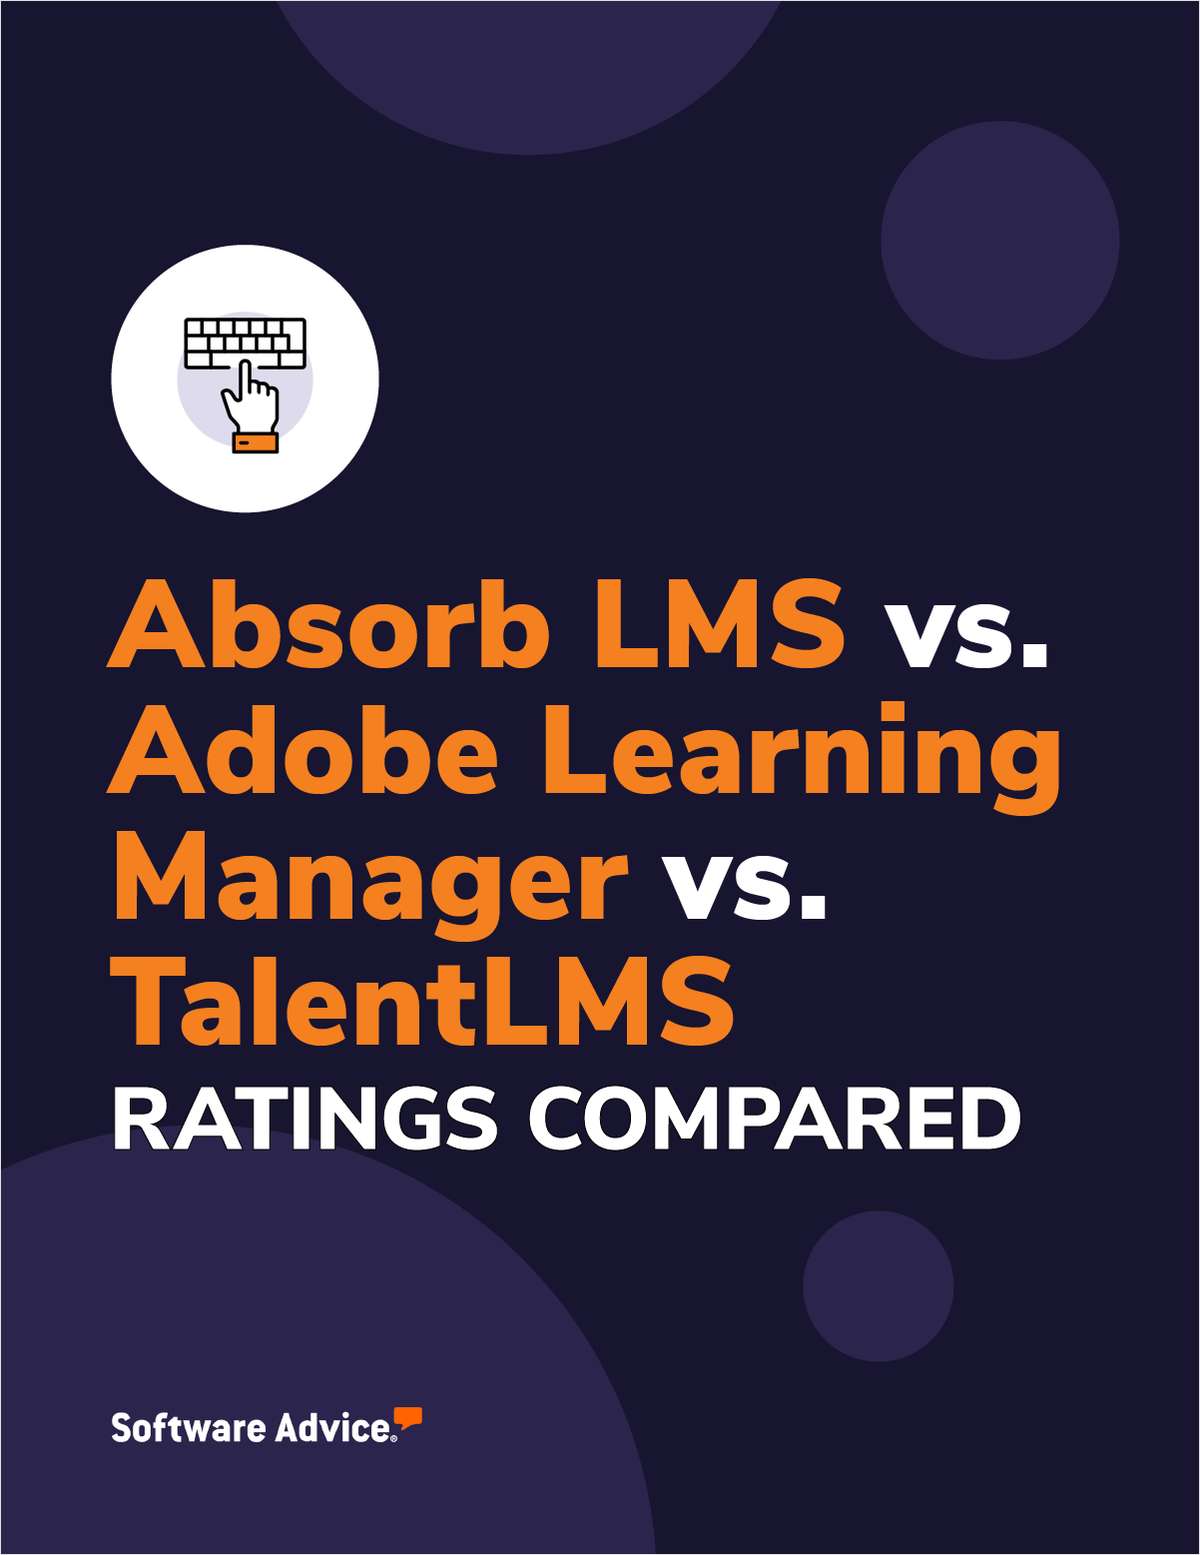 Absorb LMS vs. Adobe Learning Manager vs. TalentLMS Ratings Compared